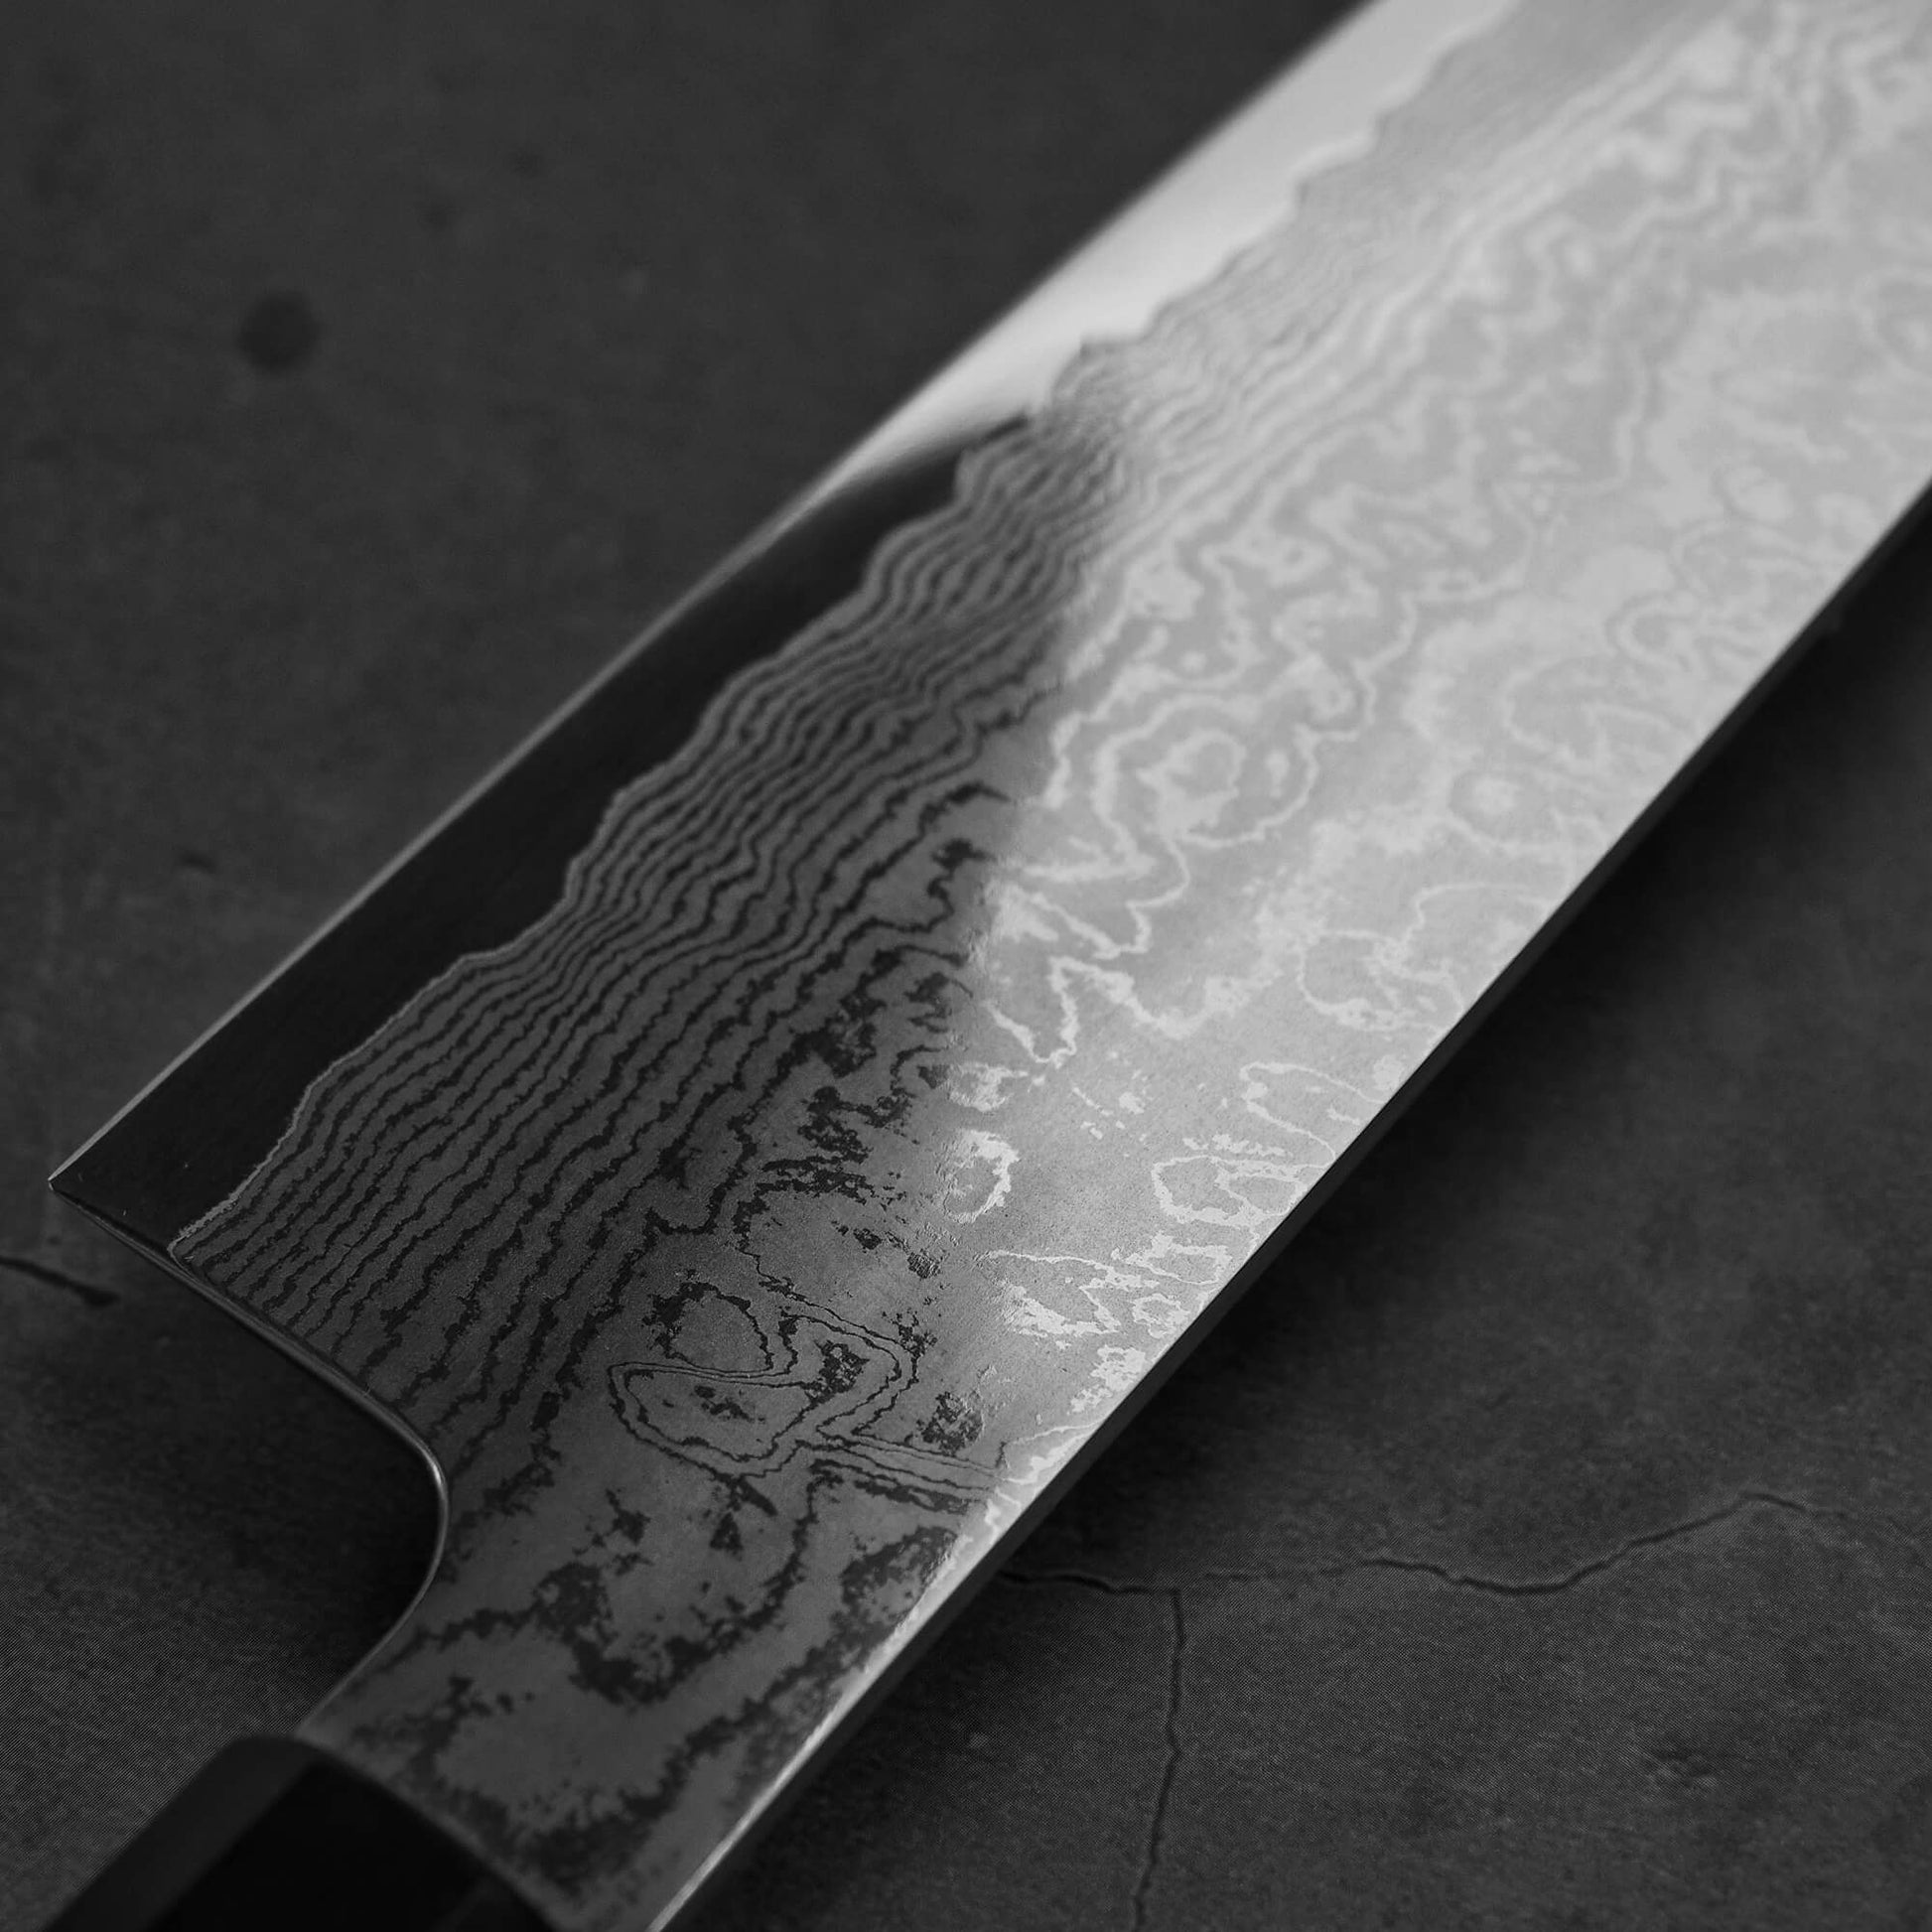 Close up view of the Sukenari damascus XEOS gyuto . Image focuses on the heel area of the left side of the blade